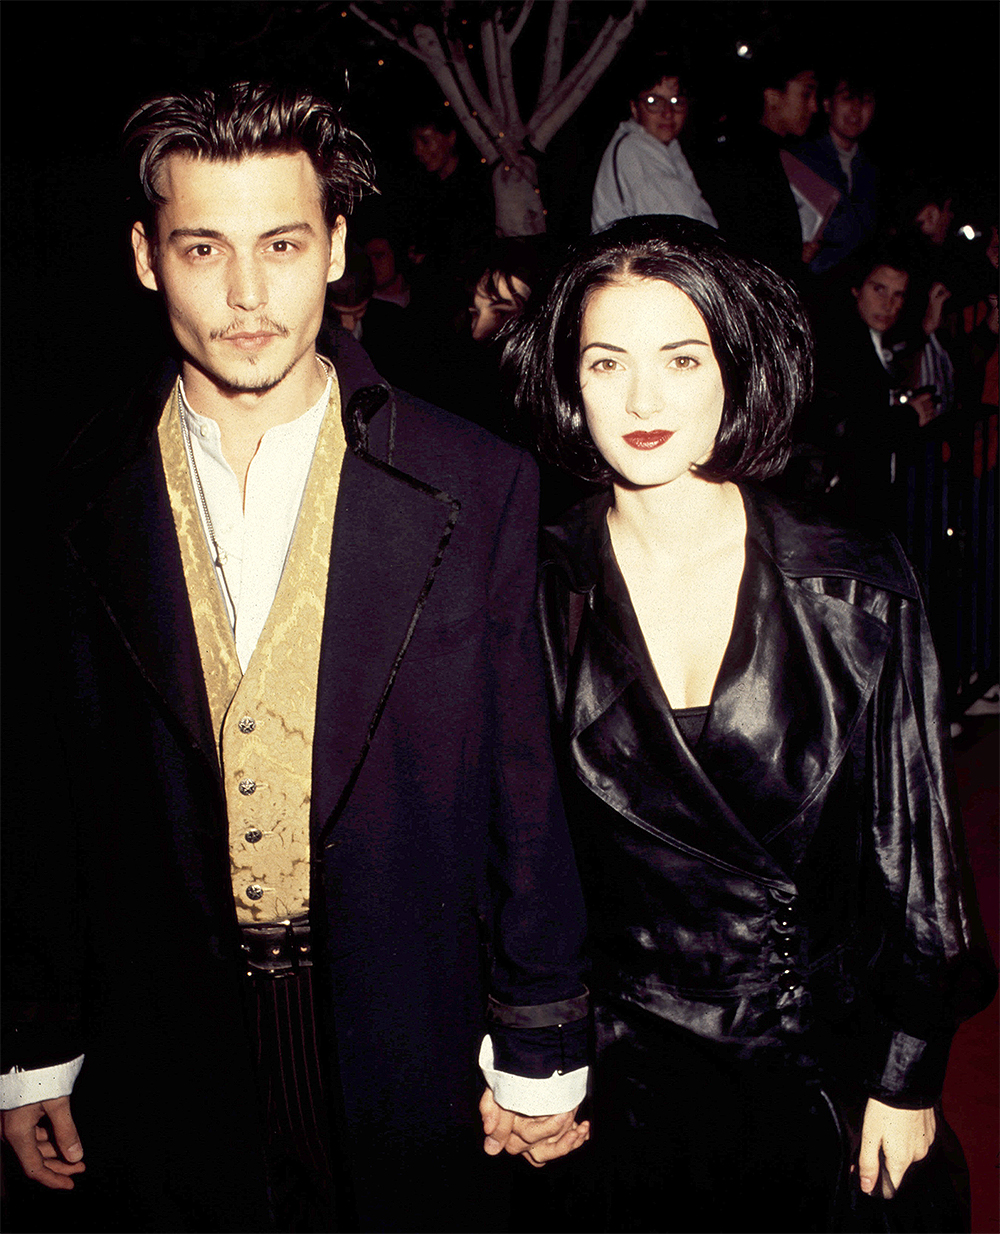 <p>In 1990, Johnny began a relationship that would last for the bulk of his career: he connected with director Tim Burton for the movie ‘Edward Scissorhands.’ The film, released when Johnny was 27, saw him work opposite his then-girlfriend, <a href="https://hollywoodlife.com/feature/winona-ryder-then-and-now-transformation-photos-4361782/">Winona Ryder</a>, seen here with him at the premiere (he proposed after five months of dating, but they split in 1993). Since ‘Scissorhands,’ Johnny has worked with Burton on seemingly an endless number of films.</p>